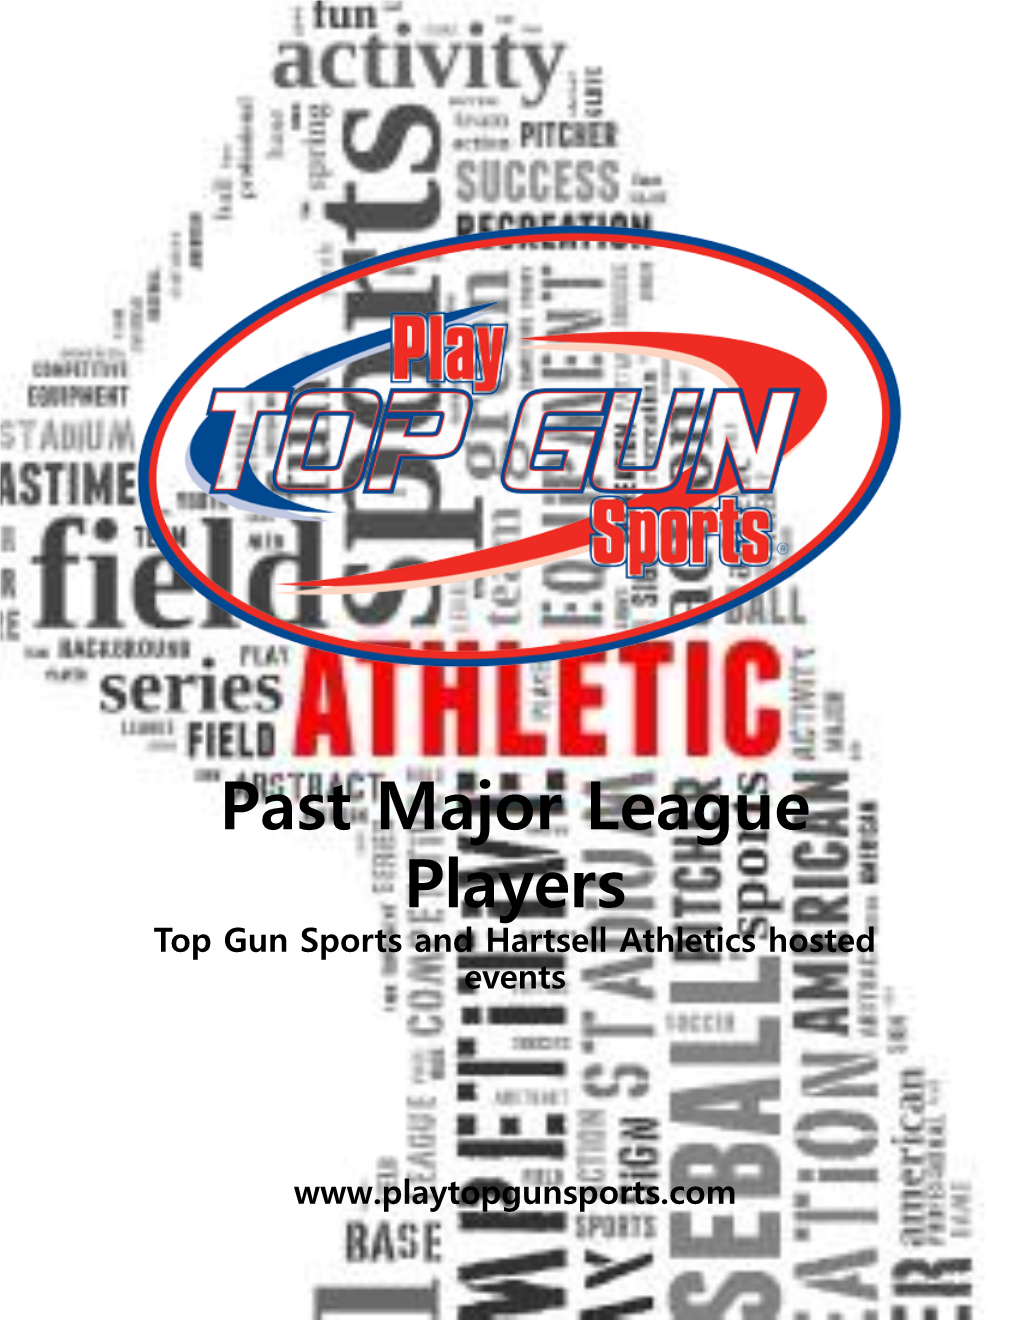 Past Major League Players Top Gun Sports and Hartsell Athletics Hosted Events